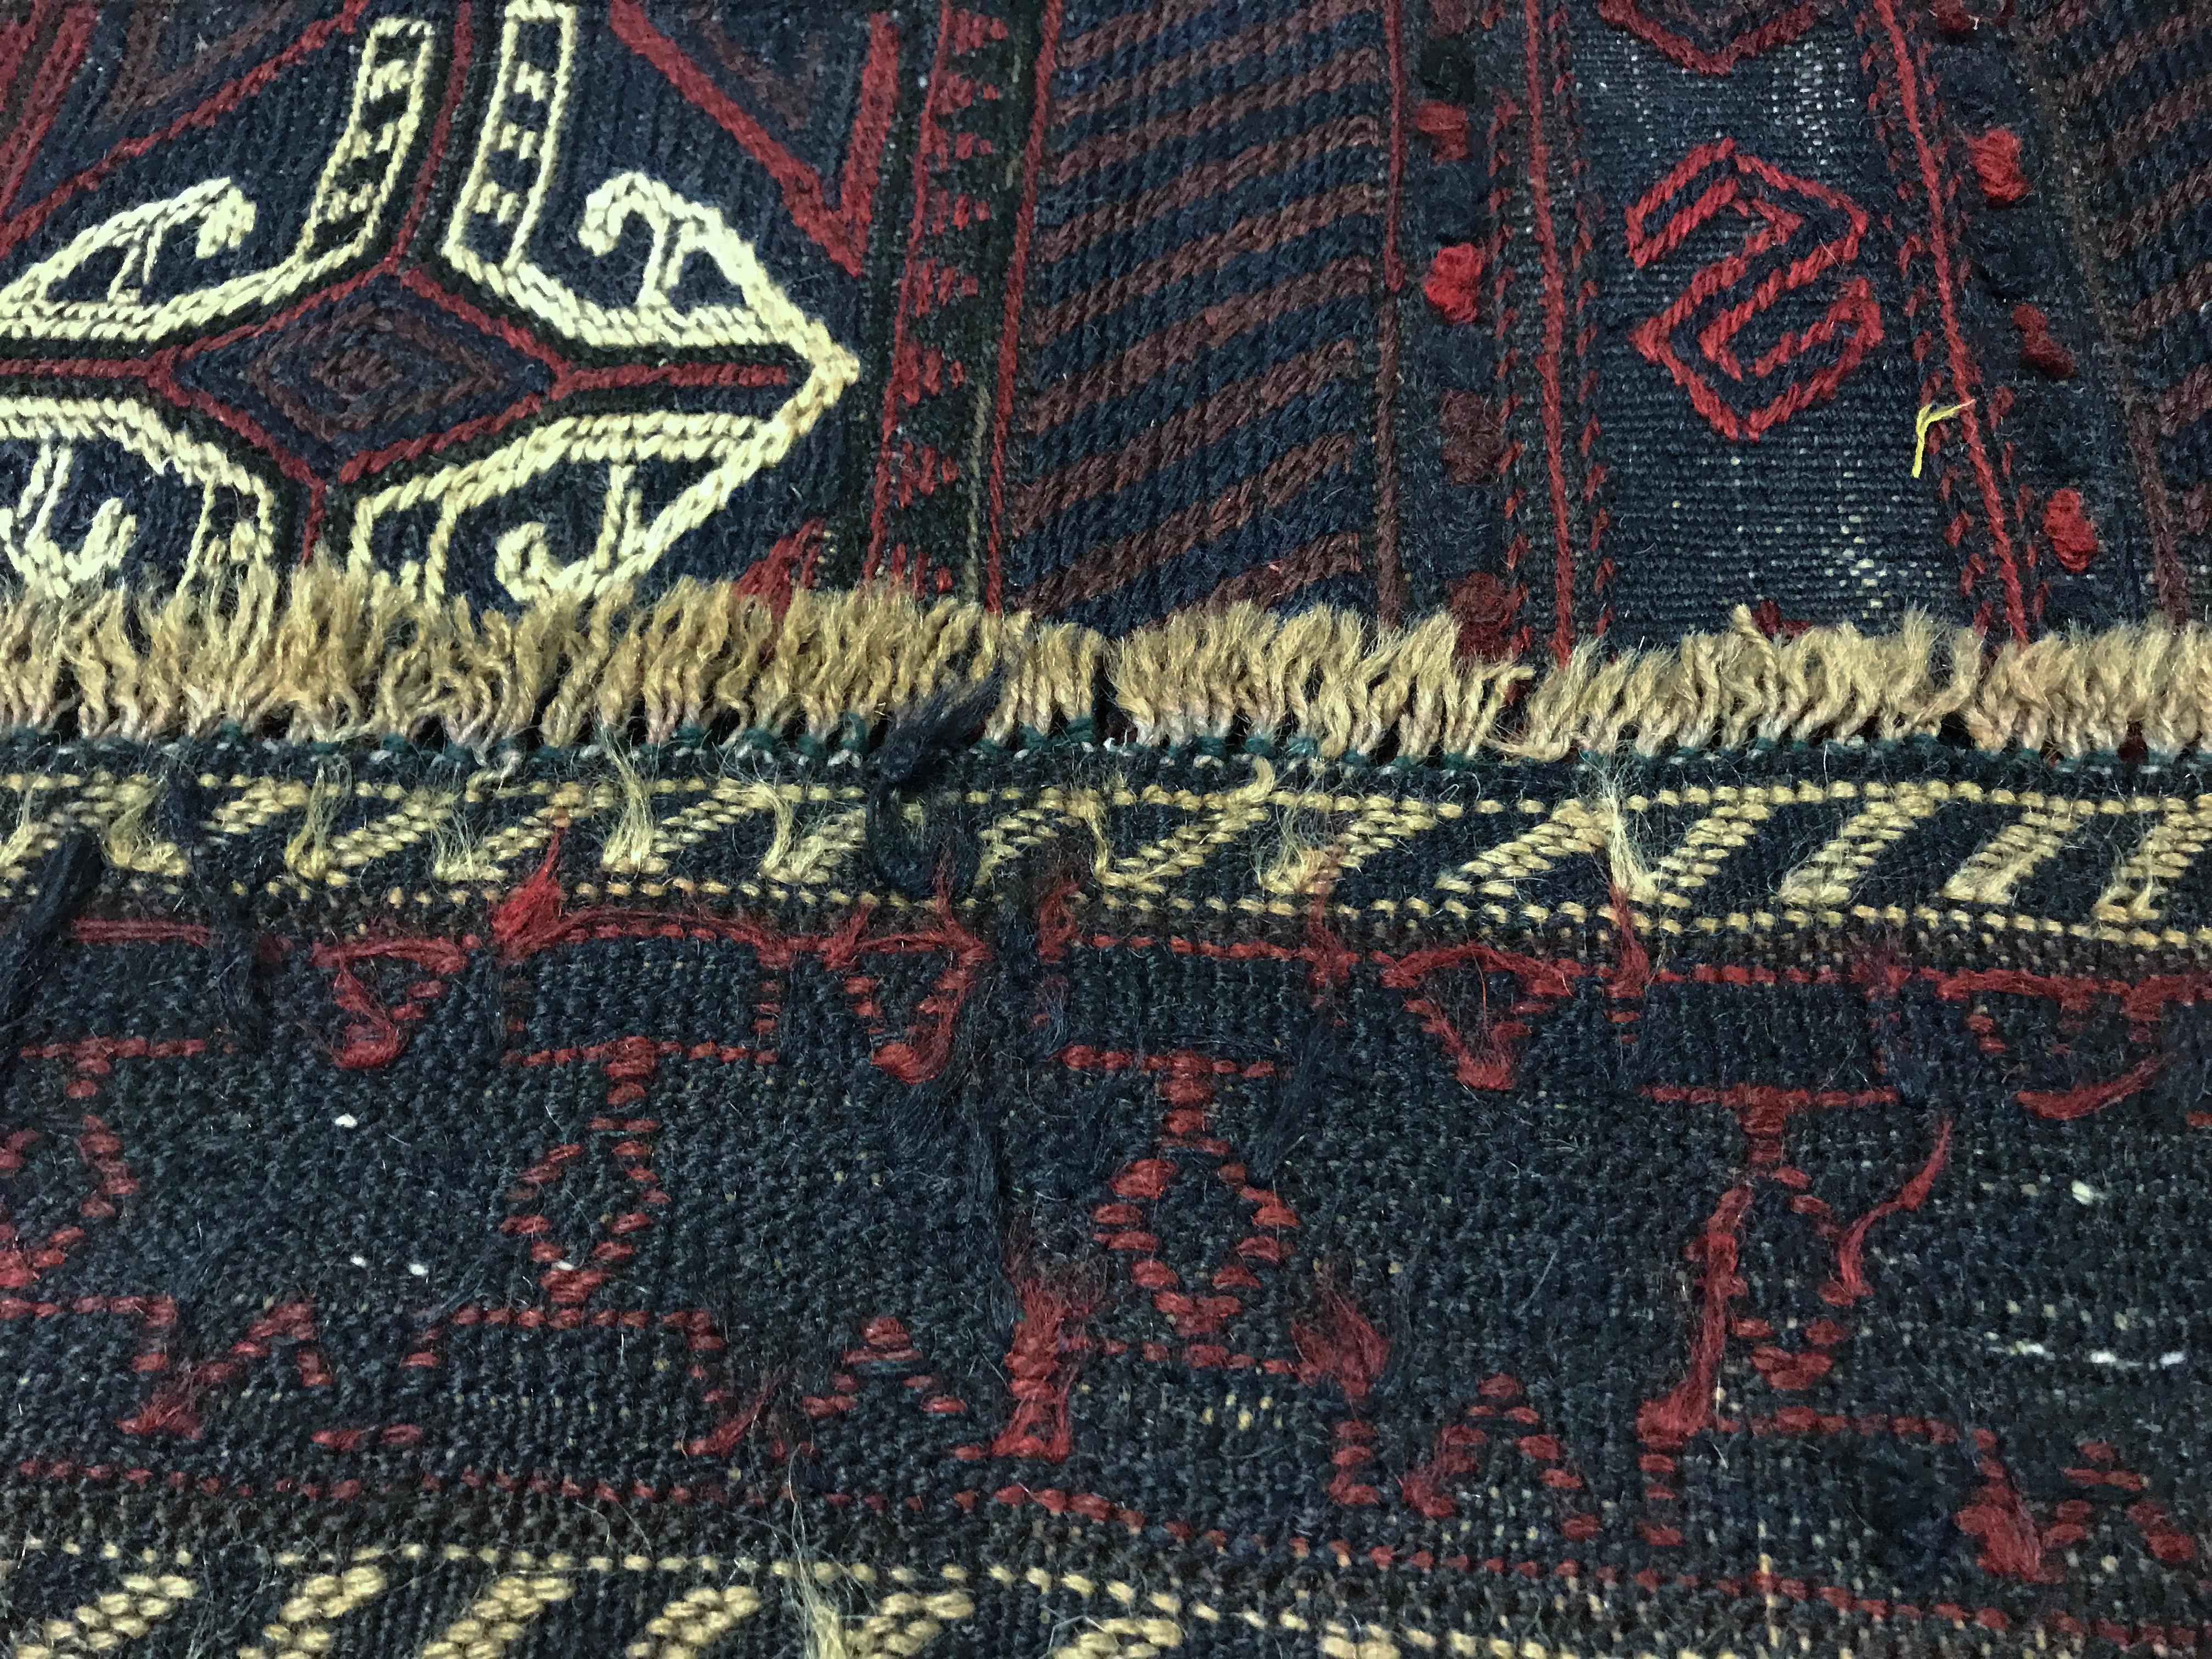 Based on authentic Oriental designs and using only the finest of wool's, these handwoven rugs are truly timeless classics. These traditional styles reflect the Classic patterns that have created the most beautiful of decors over the centuries.